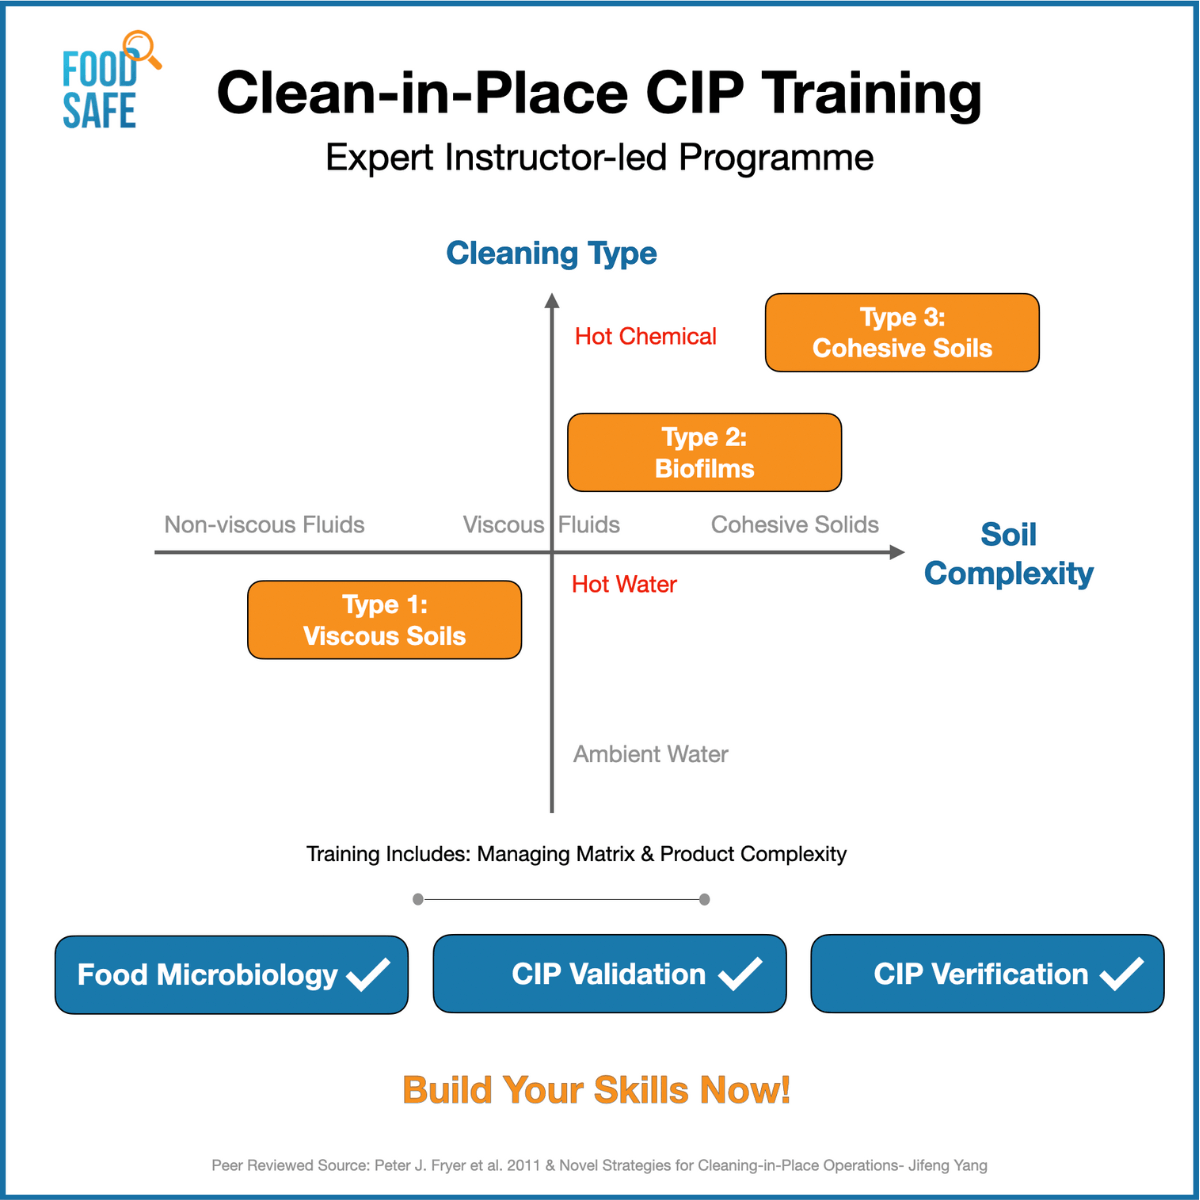 Clean-in-Place CIP Training - Product Matrix and Soil Complexity